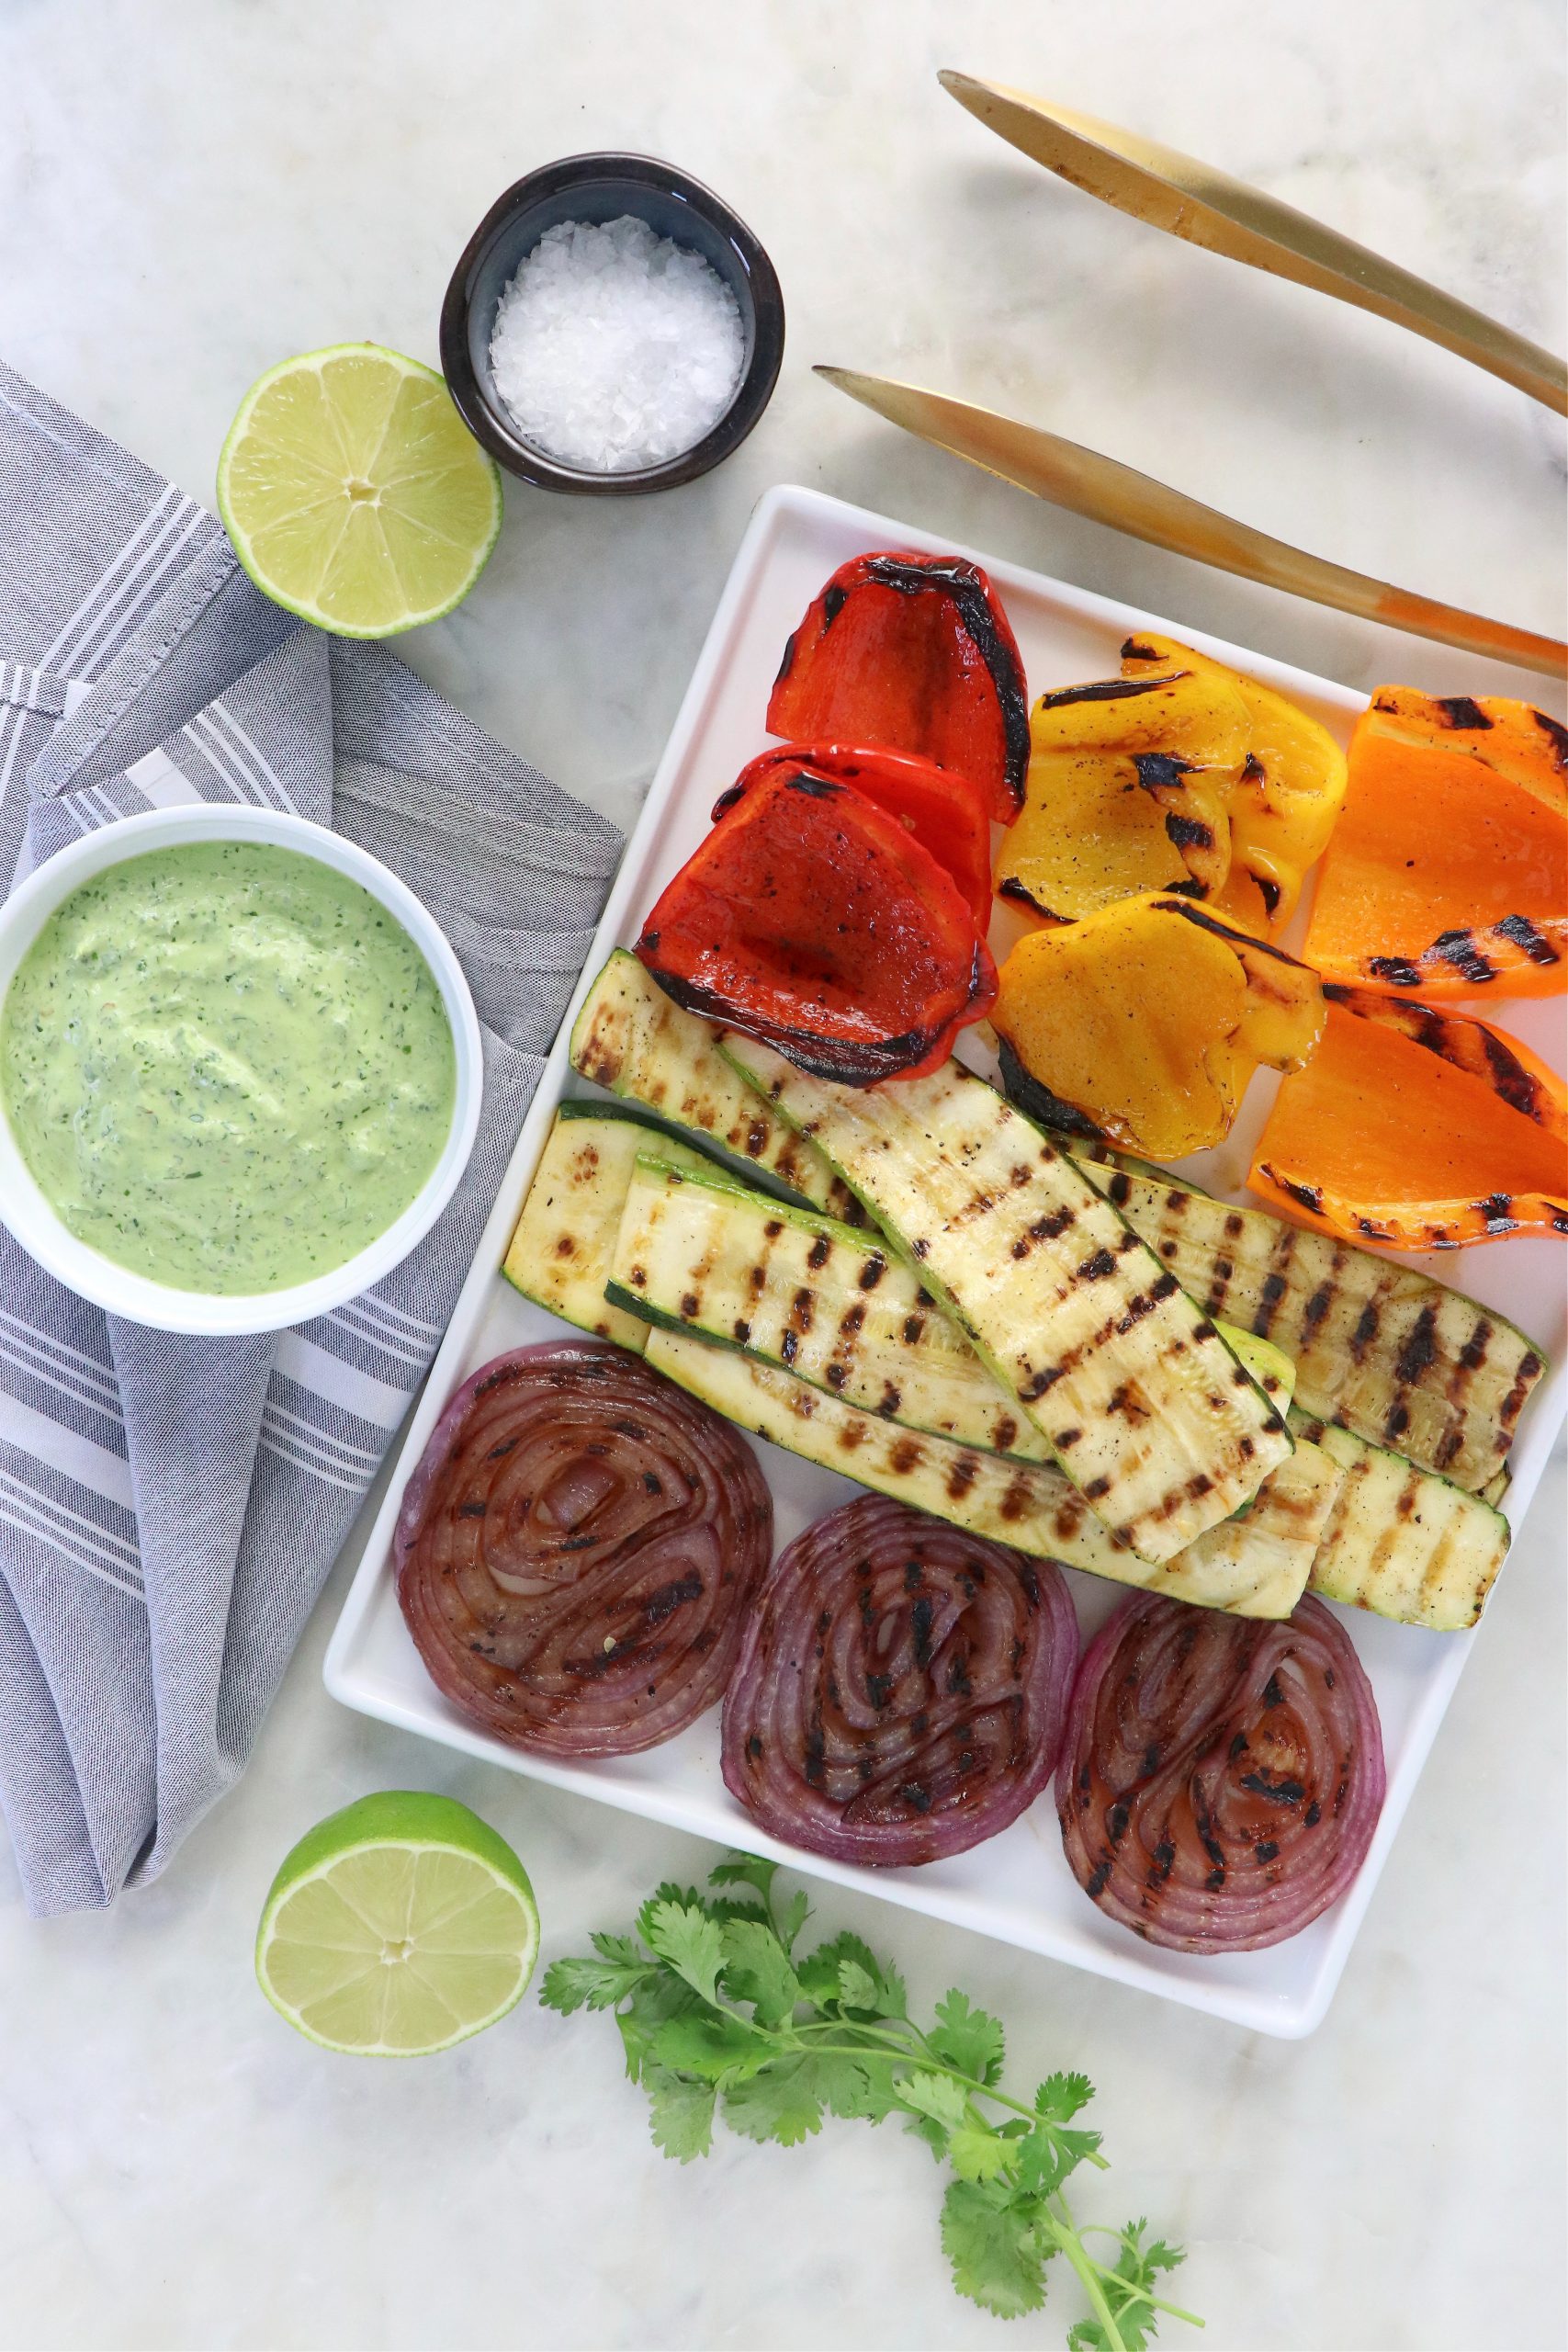 Grilled Veggies with Creamy Chimichurri Sauce